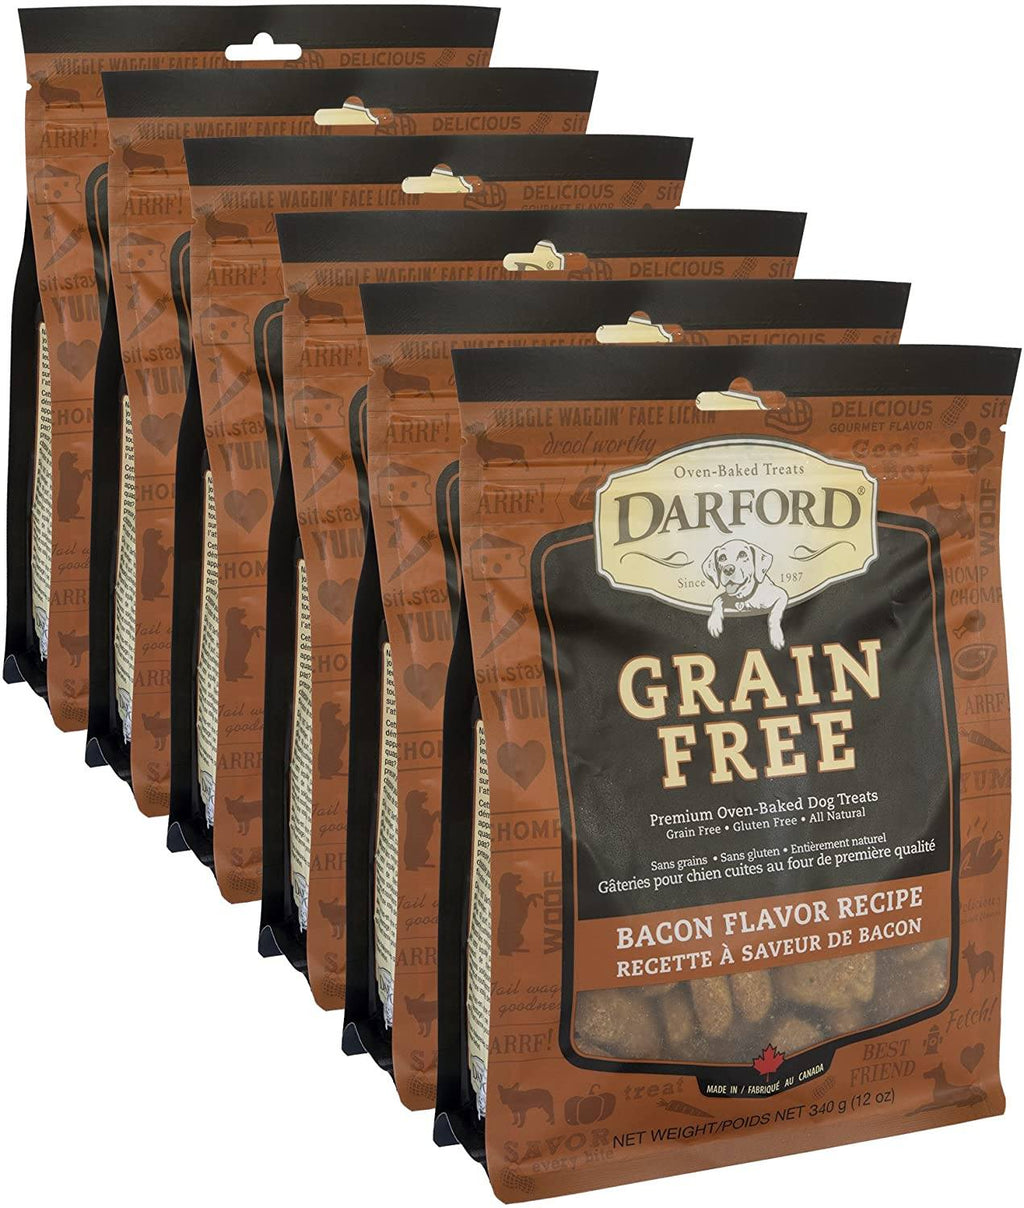 Darford Grain Free Bacon Recipe Dog Biscuit Treats - 12 oz - Case of 6  